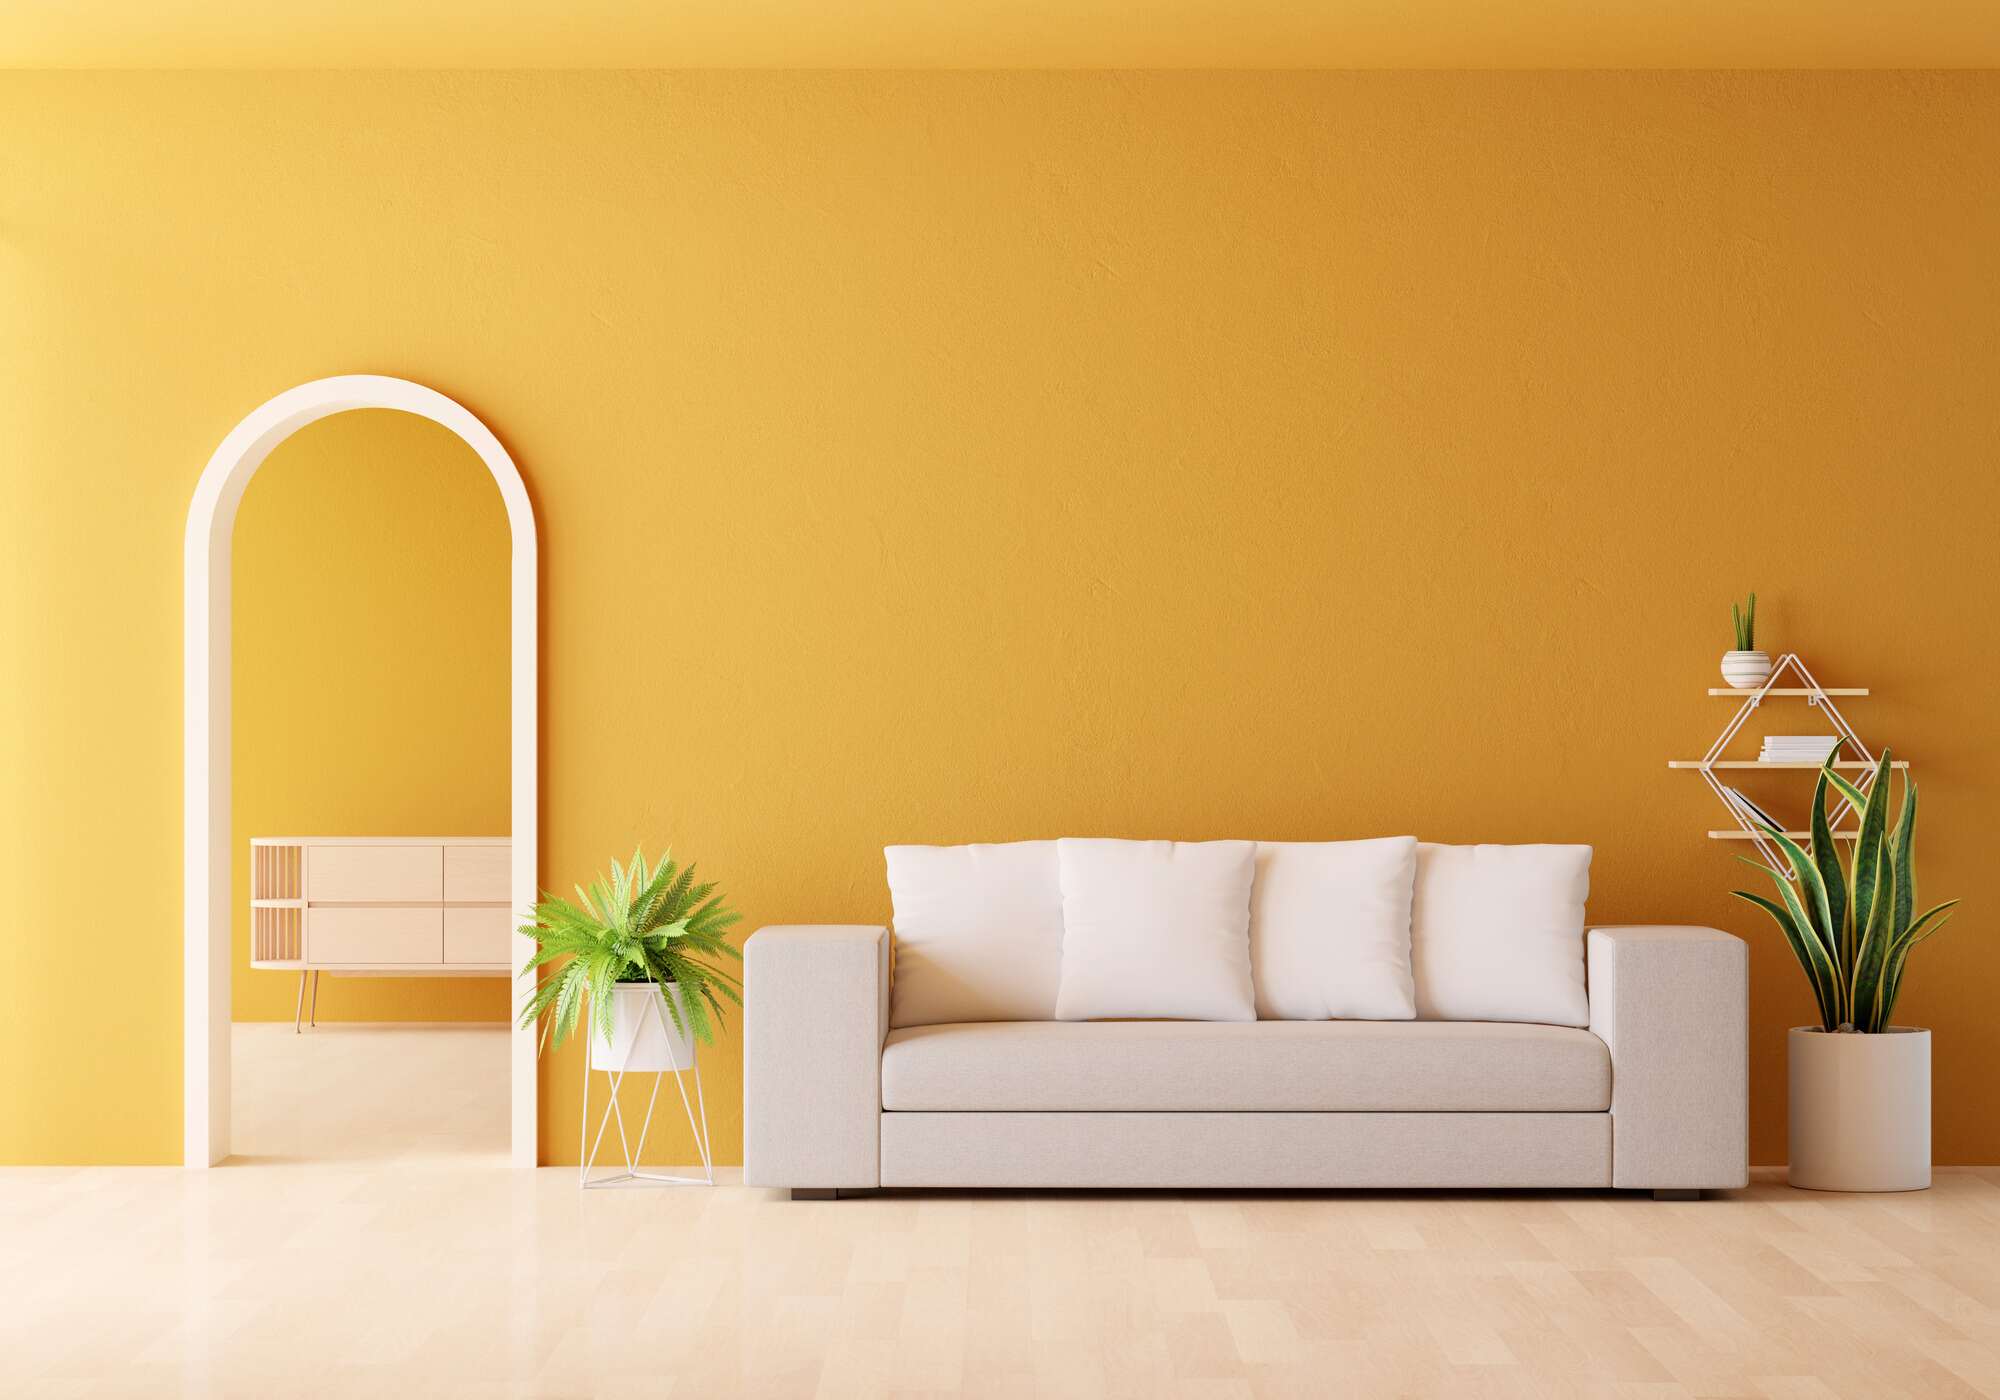 yellow-living-room-interior-with-free-space11.jpg